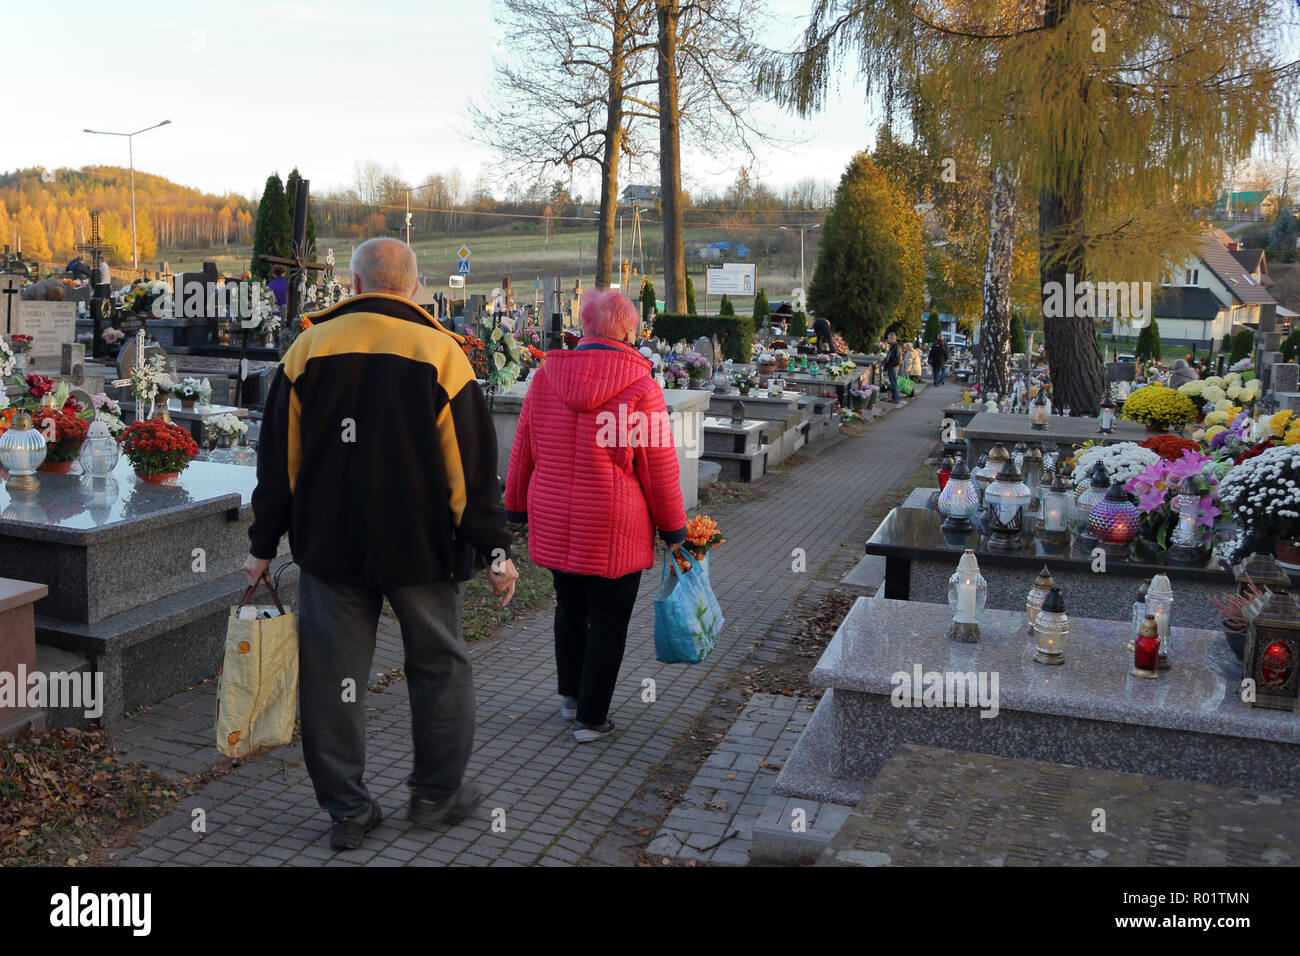 ZACHELMIE, POLAND - OCTOBER 31, 2018: An elder couple carry flowers to be laid on graves in cemetery on the eve of All Saints' Day. Credit: Slawomir Wojcik/Alamy Live News Stock Photo